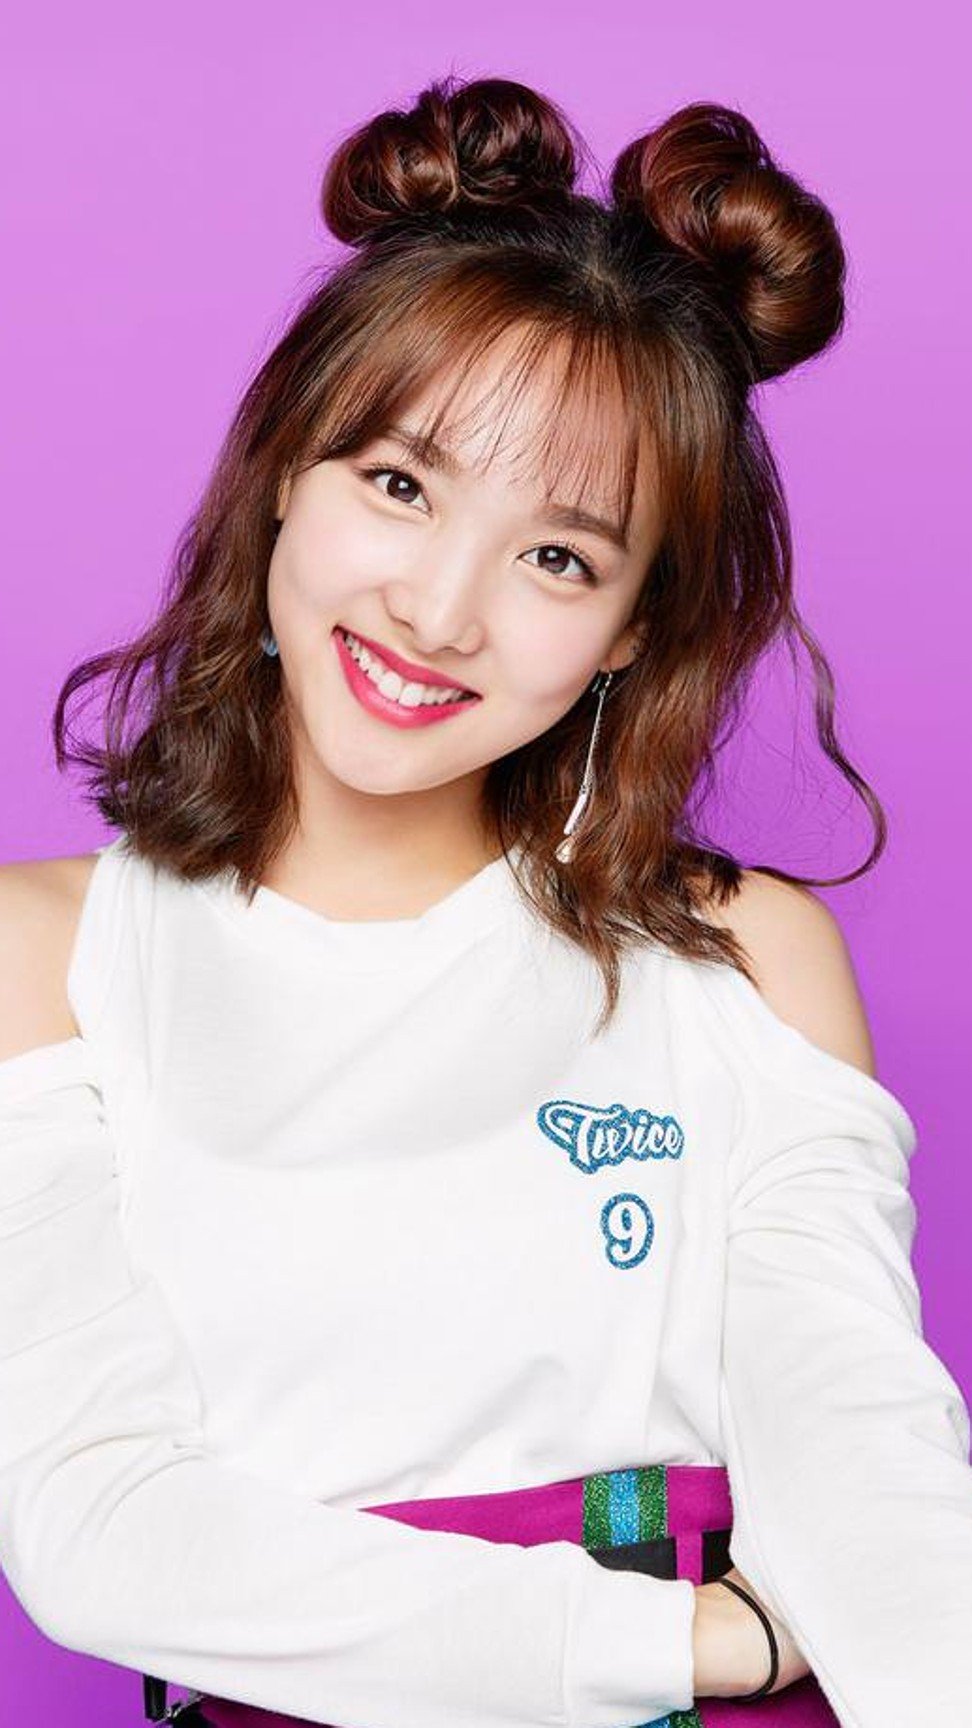 K-pop group TWICE member Nayeon makes Billboard history with her